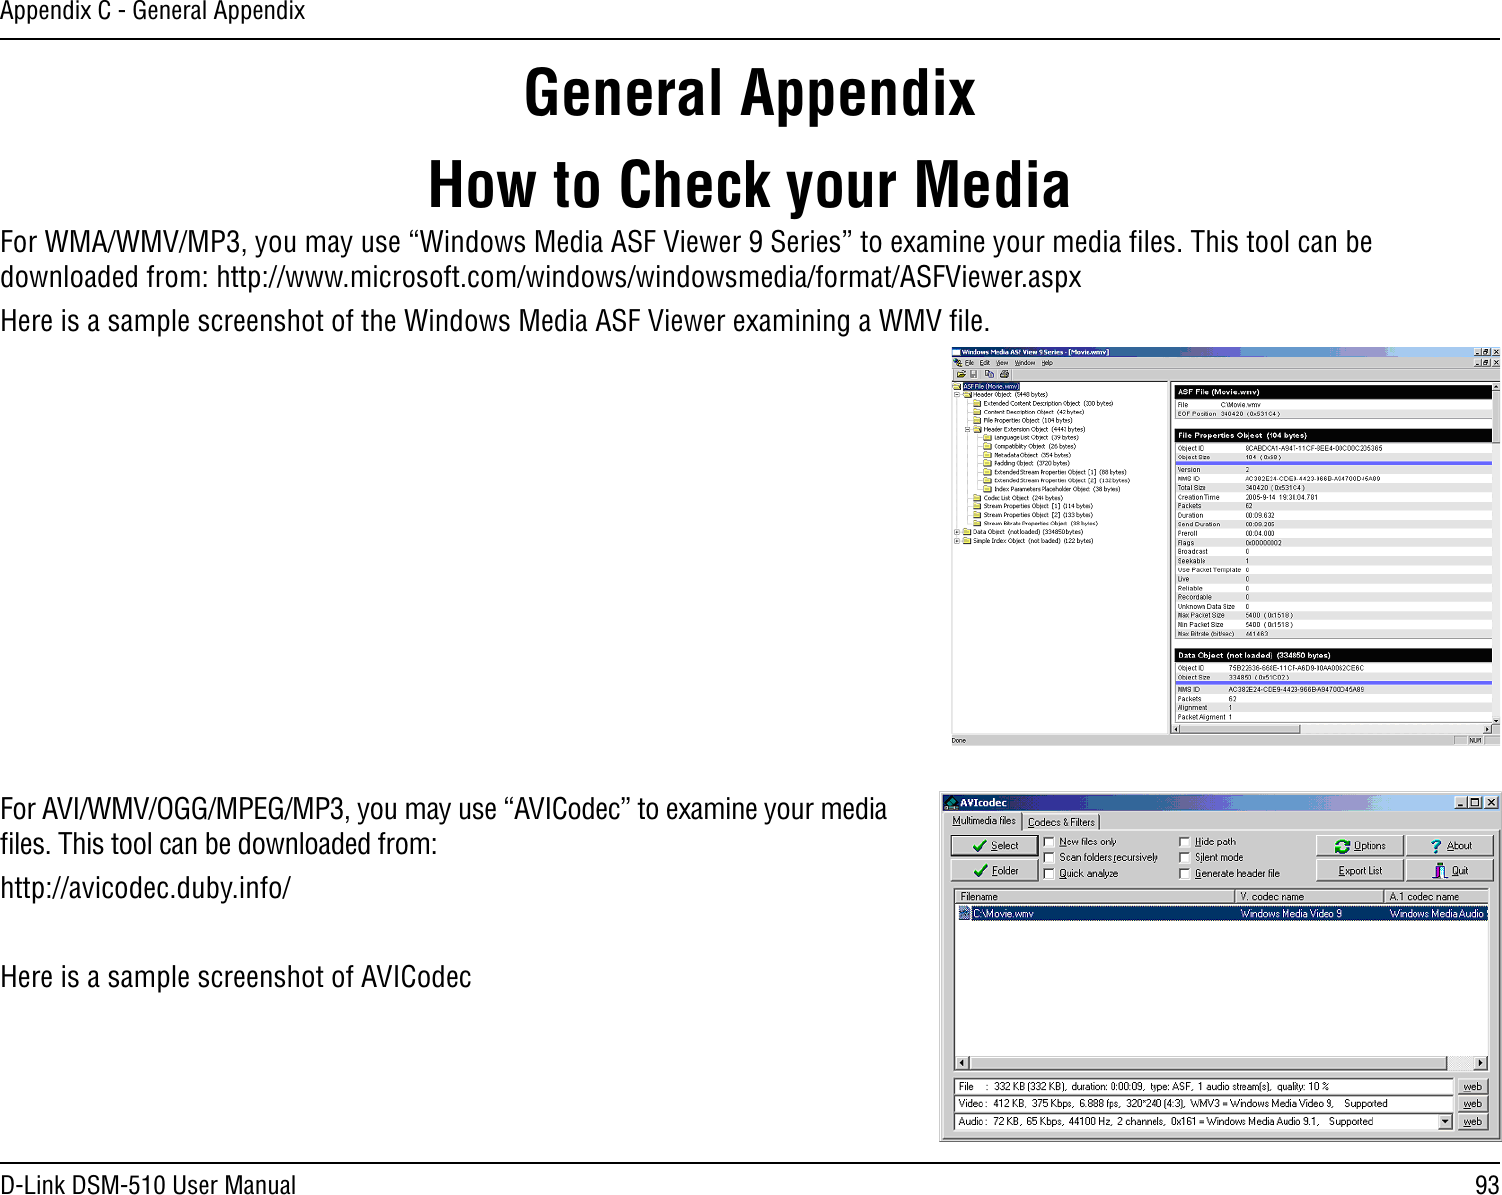 93D-Link DSM-510 User ManualAppendix C - General AppendixHow to Check your MediaFor WMA/WMV/MP3, you may use “Windows Media ASF Viewer 9 Series” to examine your media ﬁles. This tool can be downloaded from: http://www.microsoft.com/windows/windowsmedia/format/ASFViewer.aspxHere is a sample screenshot of the Windows Media ASF Viewer examining a WMV ﬁle.For AVI/WMV/OGG/MPEG/MP3, you may use “AVICodec” to examine your media ﬁles. This tool can be downloaded from:http://avicodec.duby.info/Here is a sample screenshot of AVICodec  General Appendix